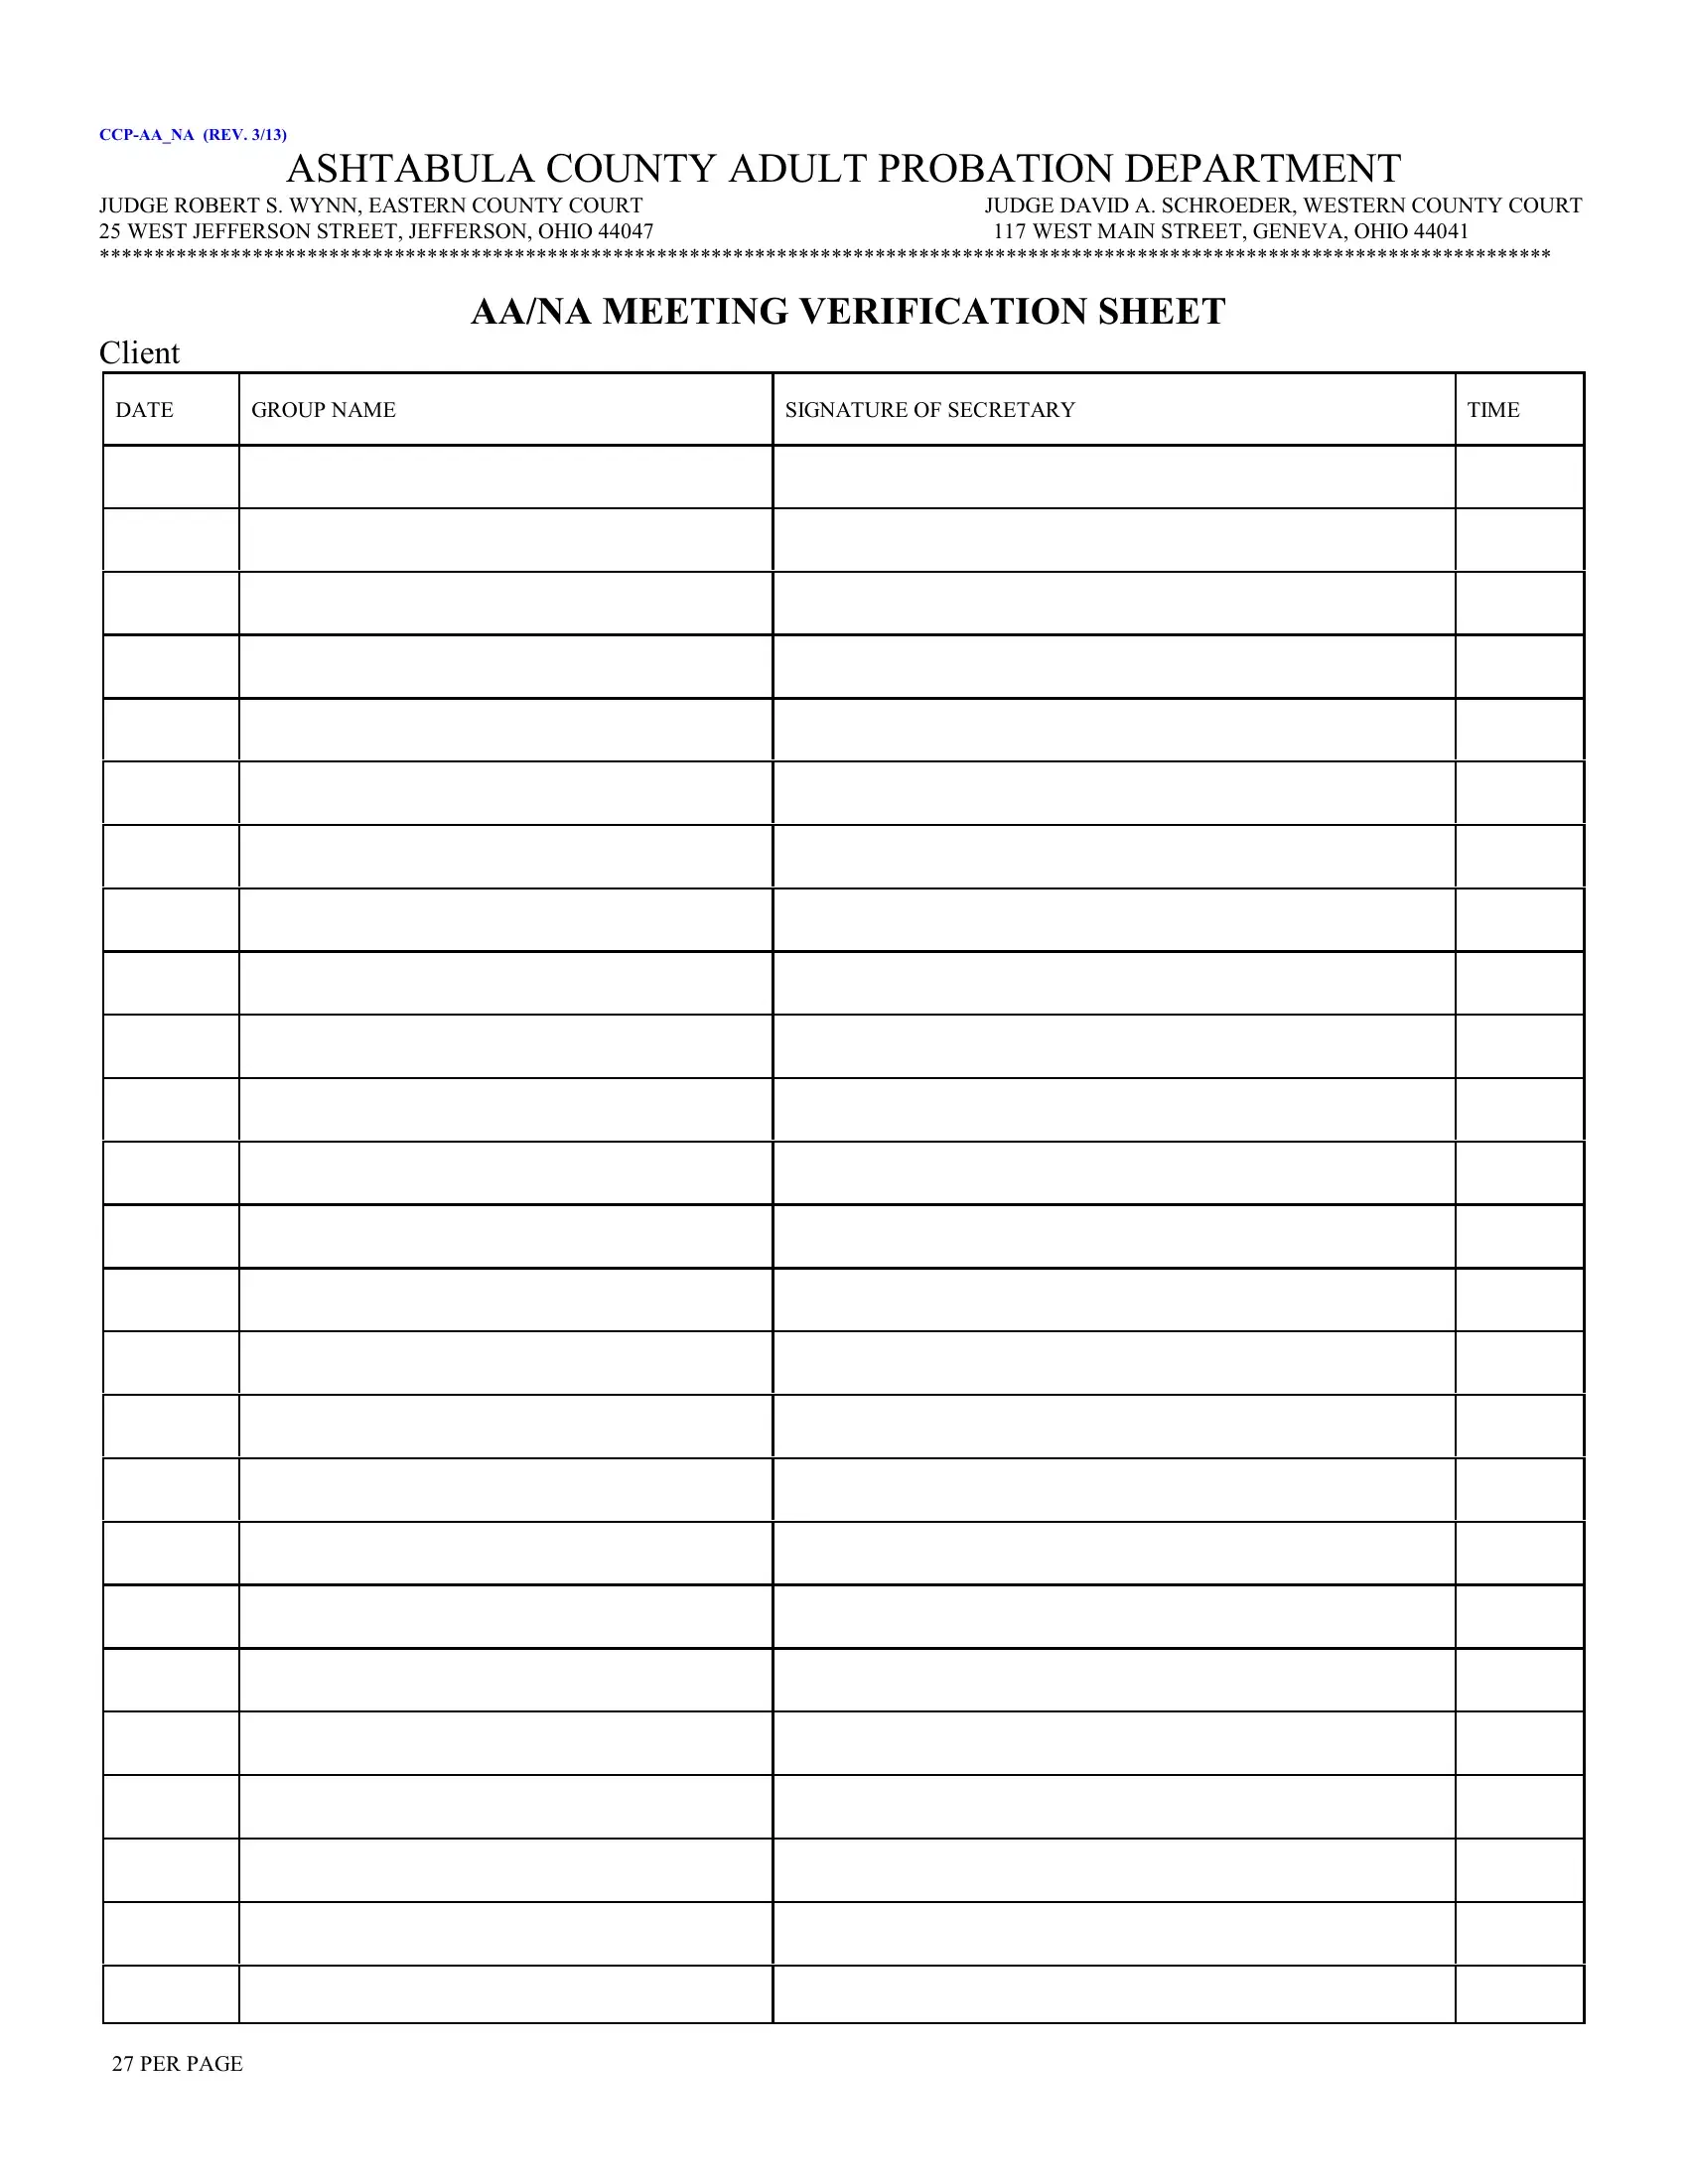 na-meeting-sheet-form-fill-out-printable-pdf-forms-online